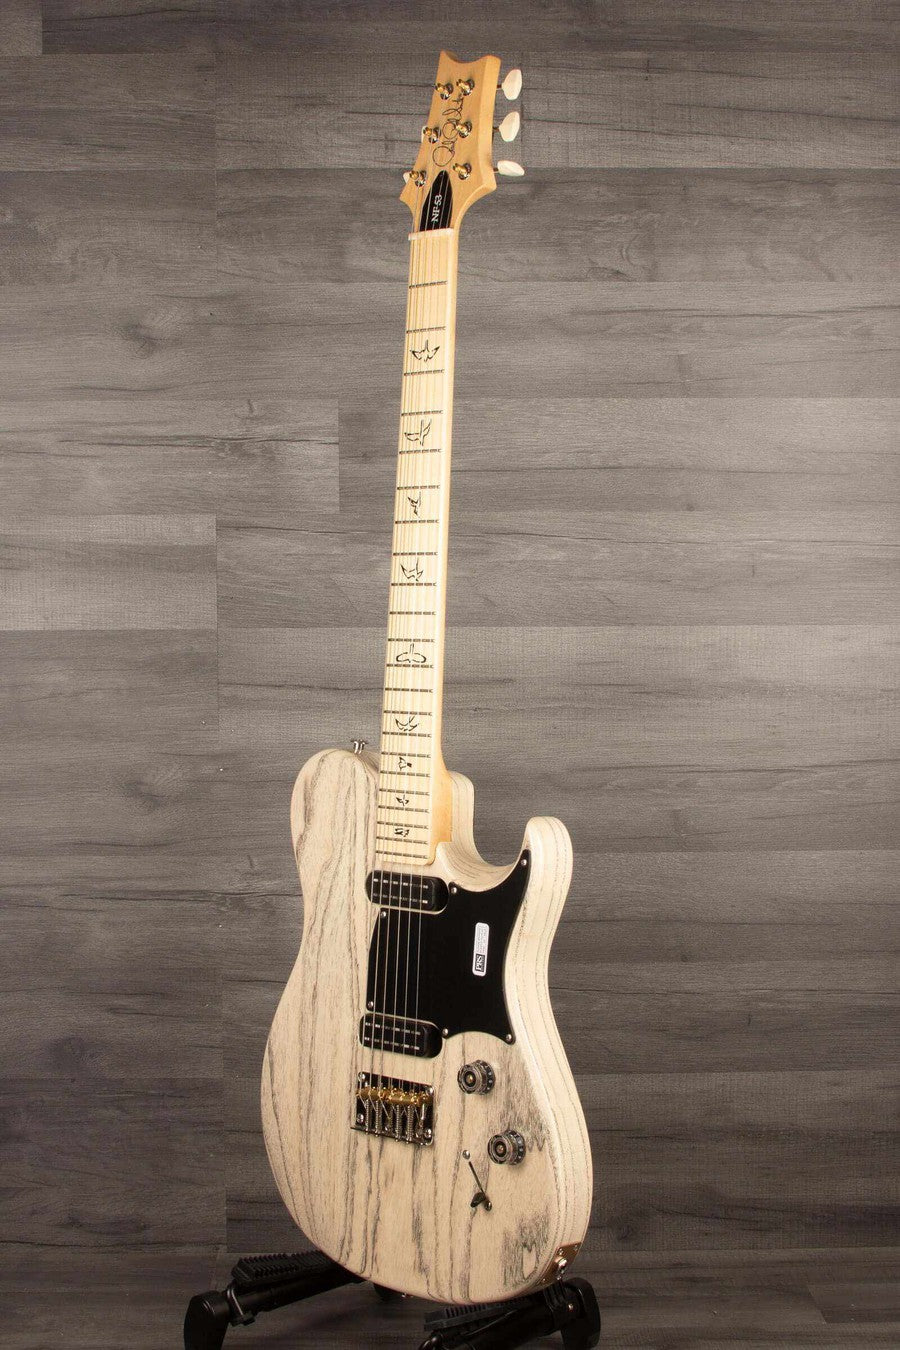 PRS NF53 - White Doghair